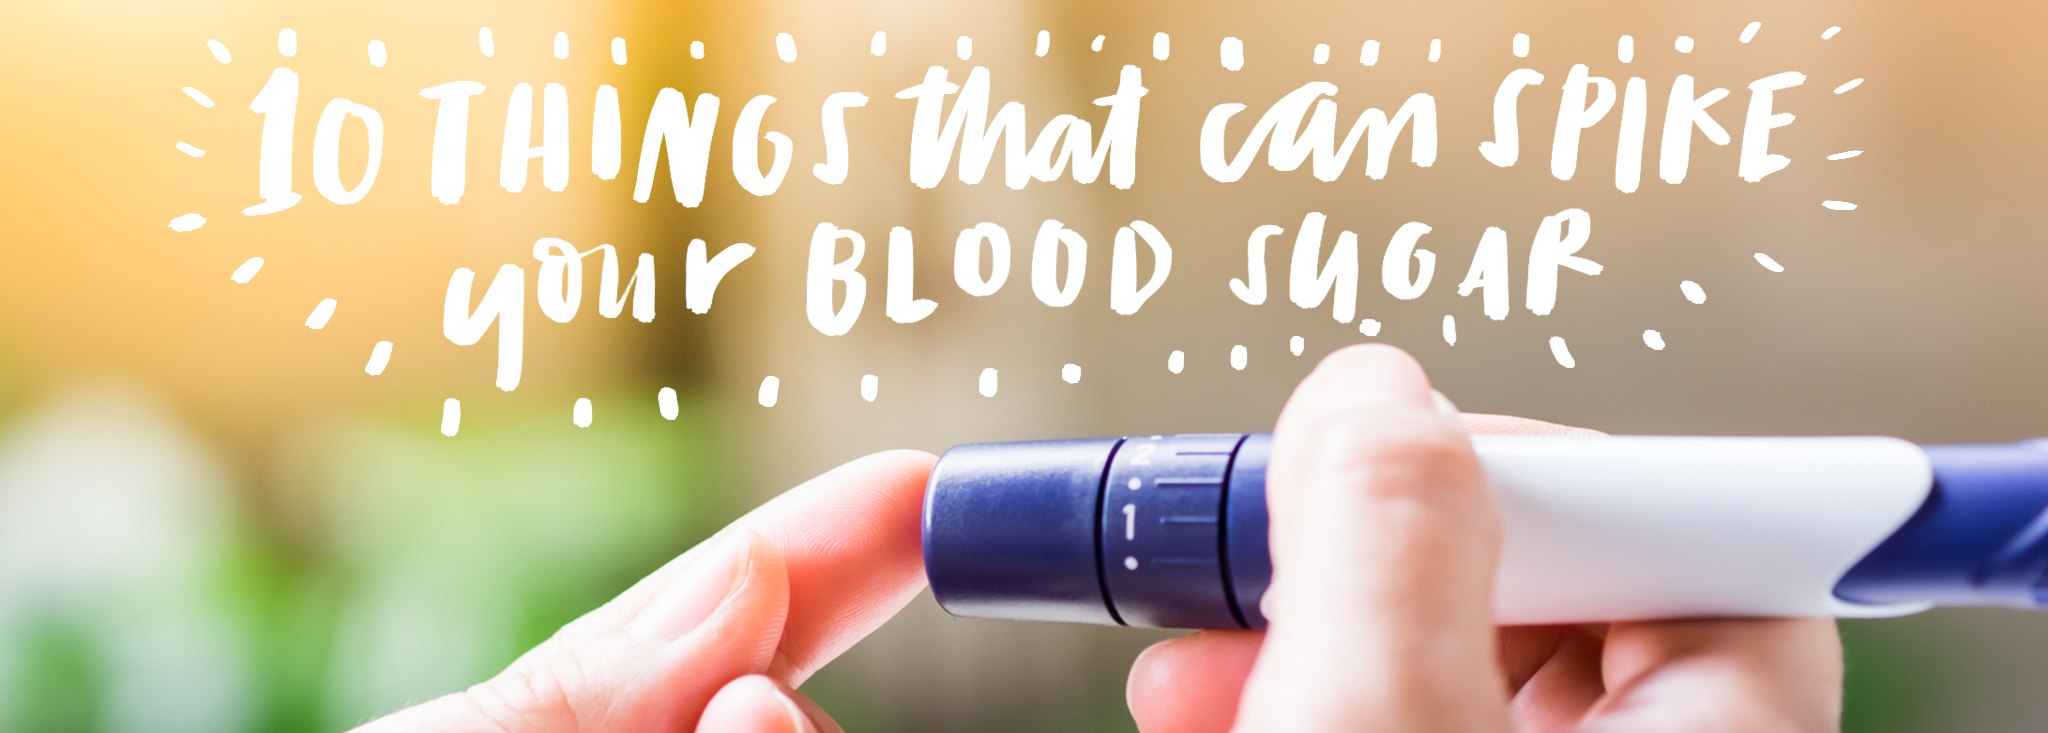 10 Things That Can Spike Your Blood Sugar